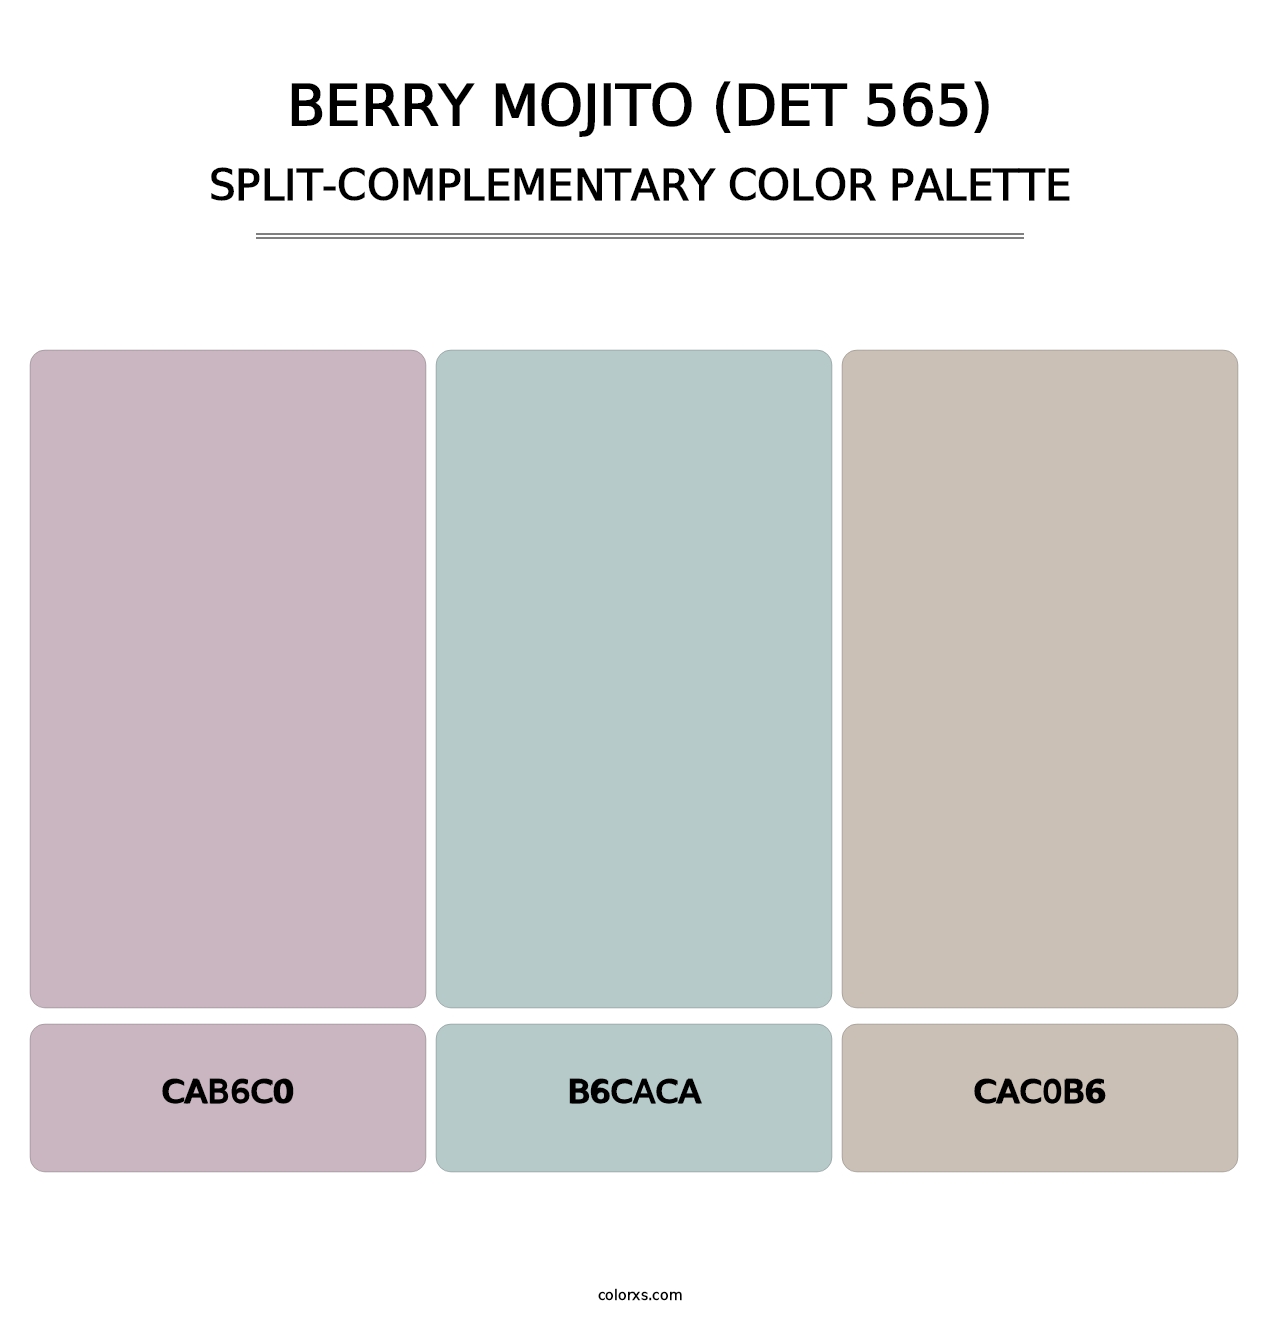 Berry Mojito (DET 565) - Split-Complementary Color Palette